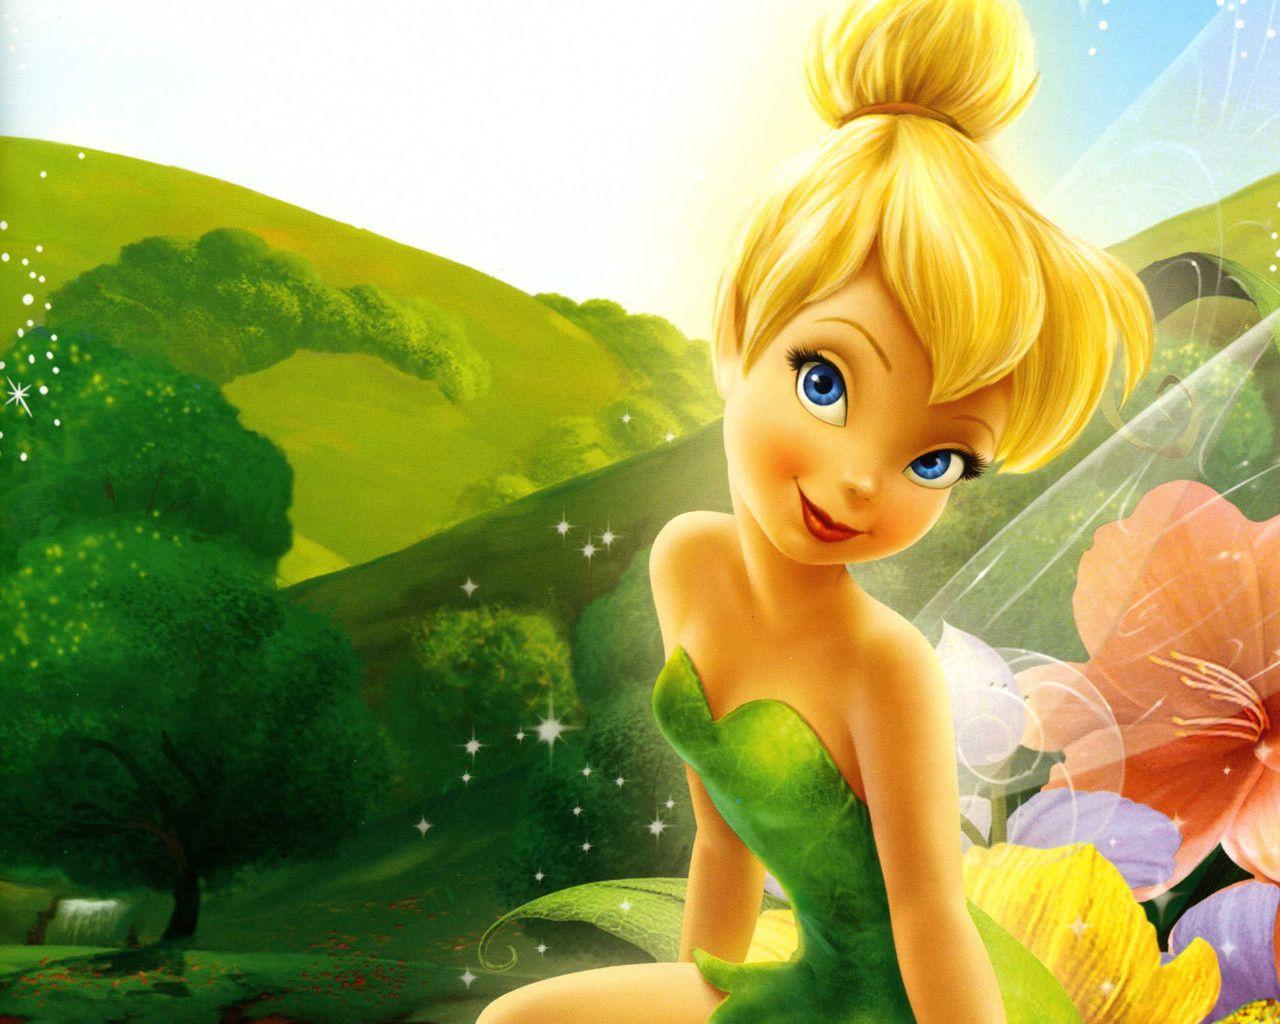 Wallpaper Ideas About Tinkerbell With Beautiful Picture Of Tinker